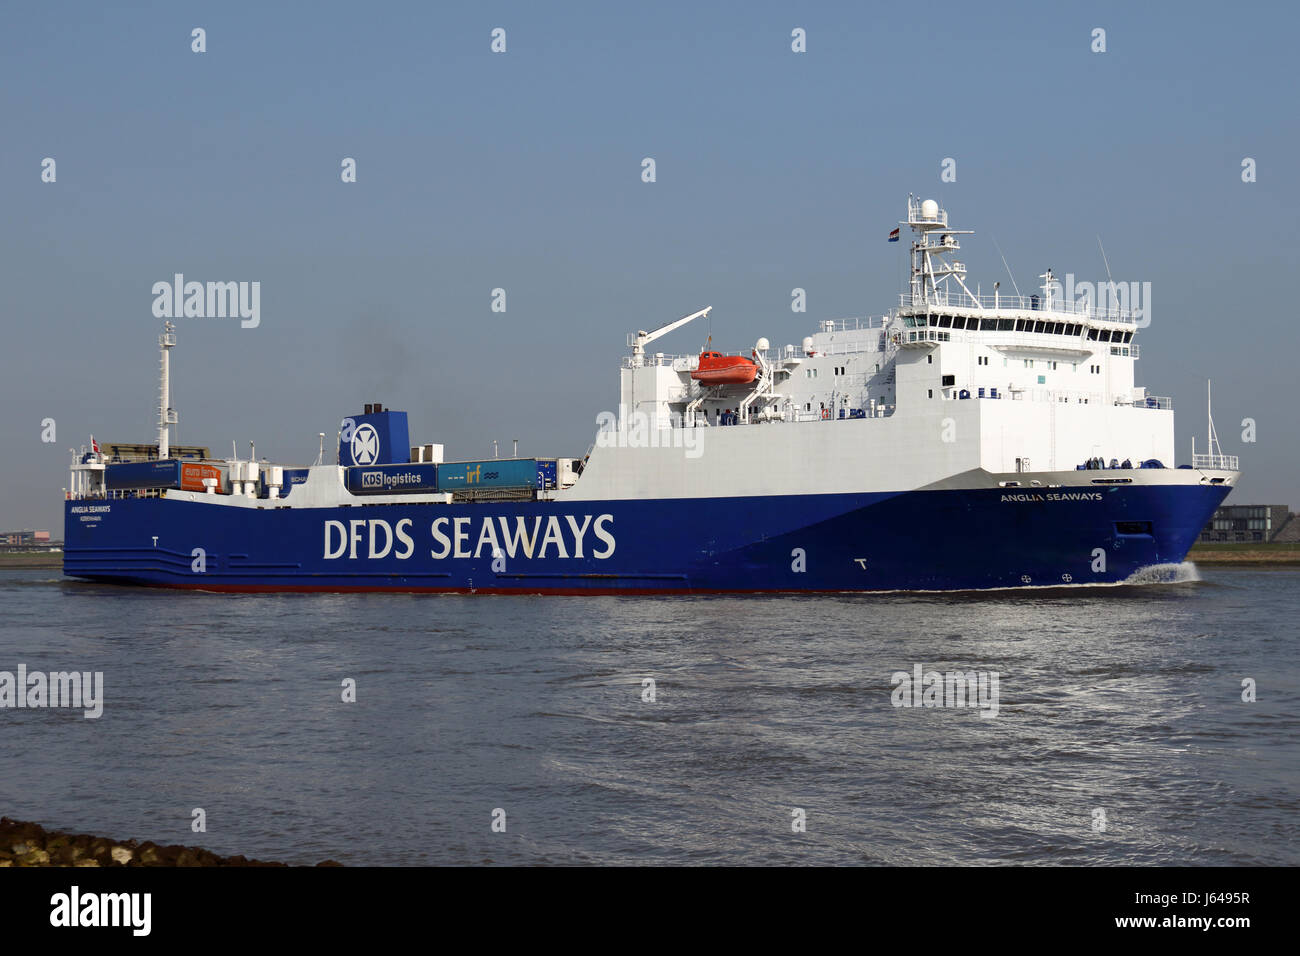 The Ro-Ro ship Anglia Seaways enters the port of Rotterdam in the canal. Stock Photo